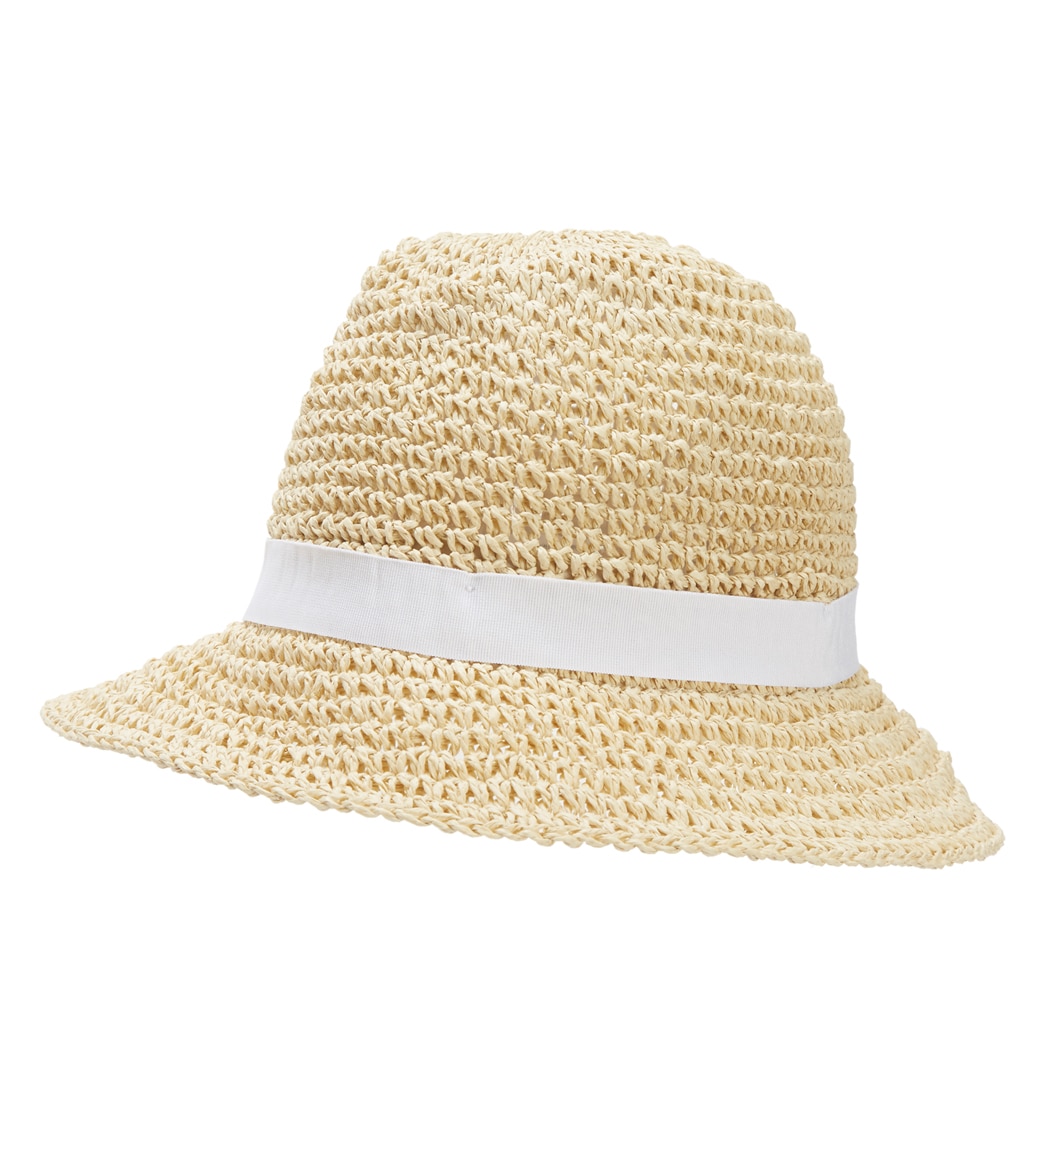 Physician Endorsed Women's Nantucket Straw Hat - Natural/White One Size - Swimoutlet.com